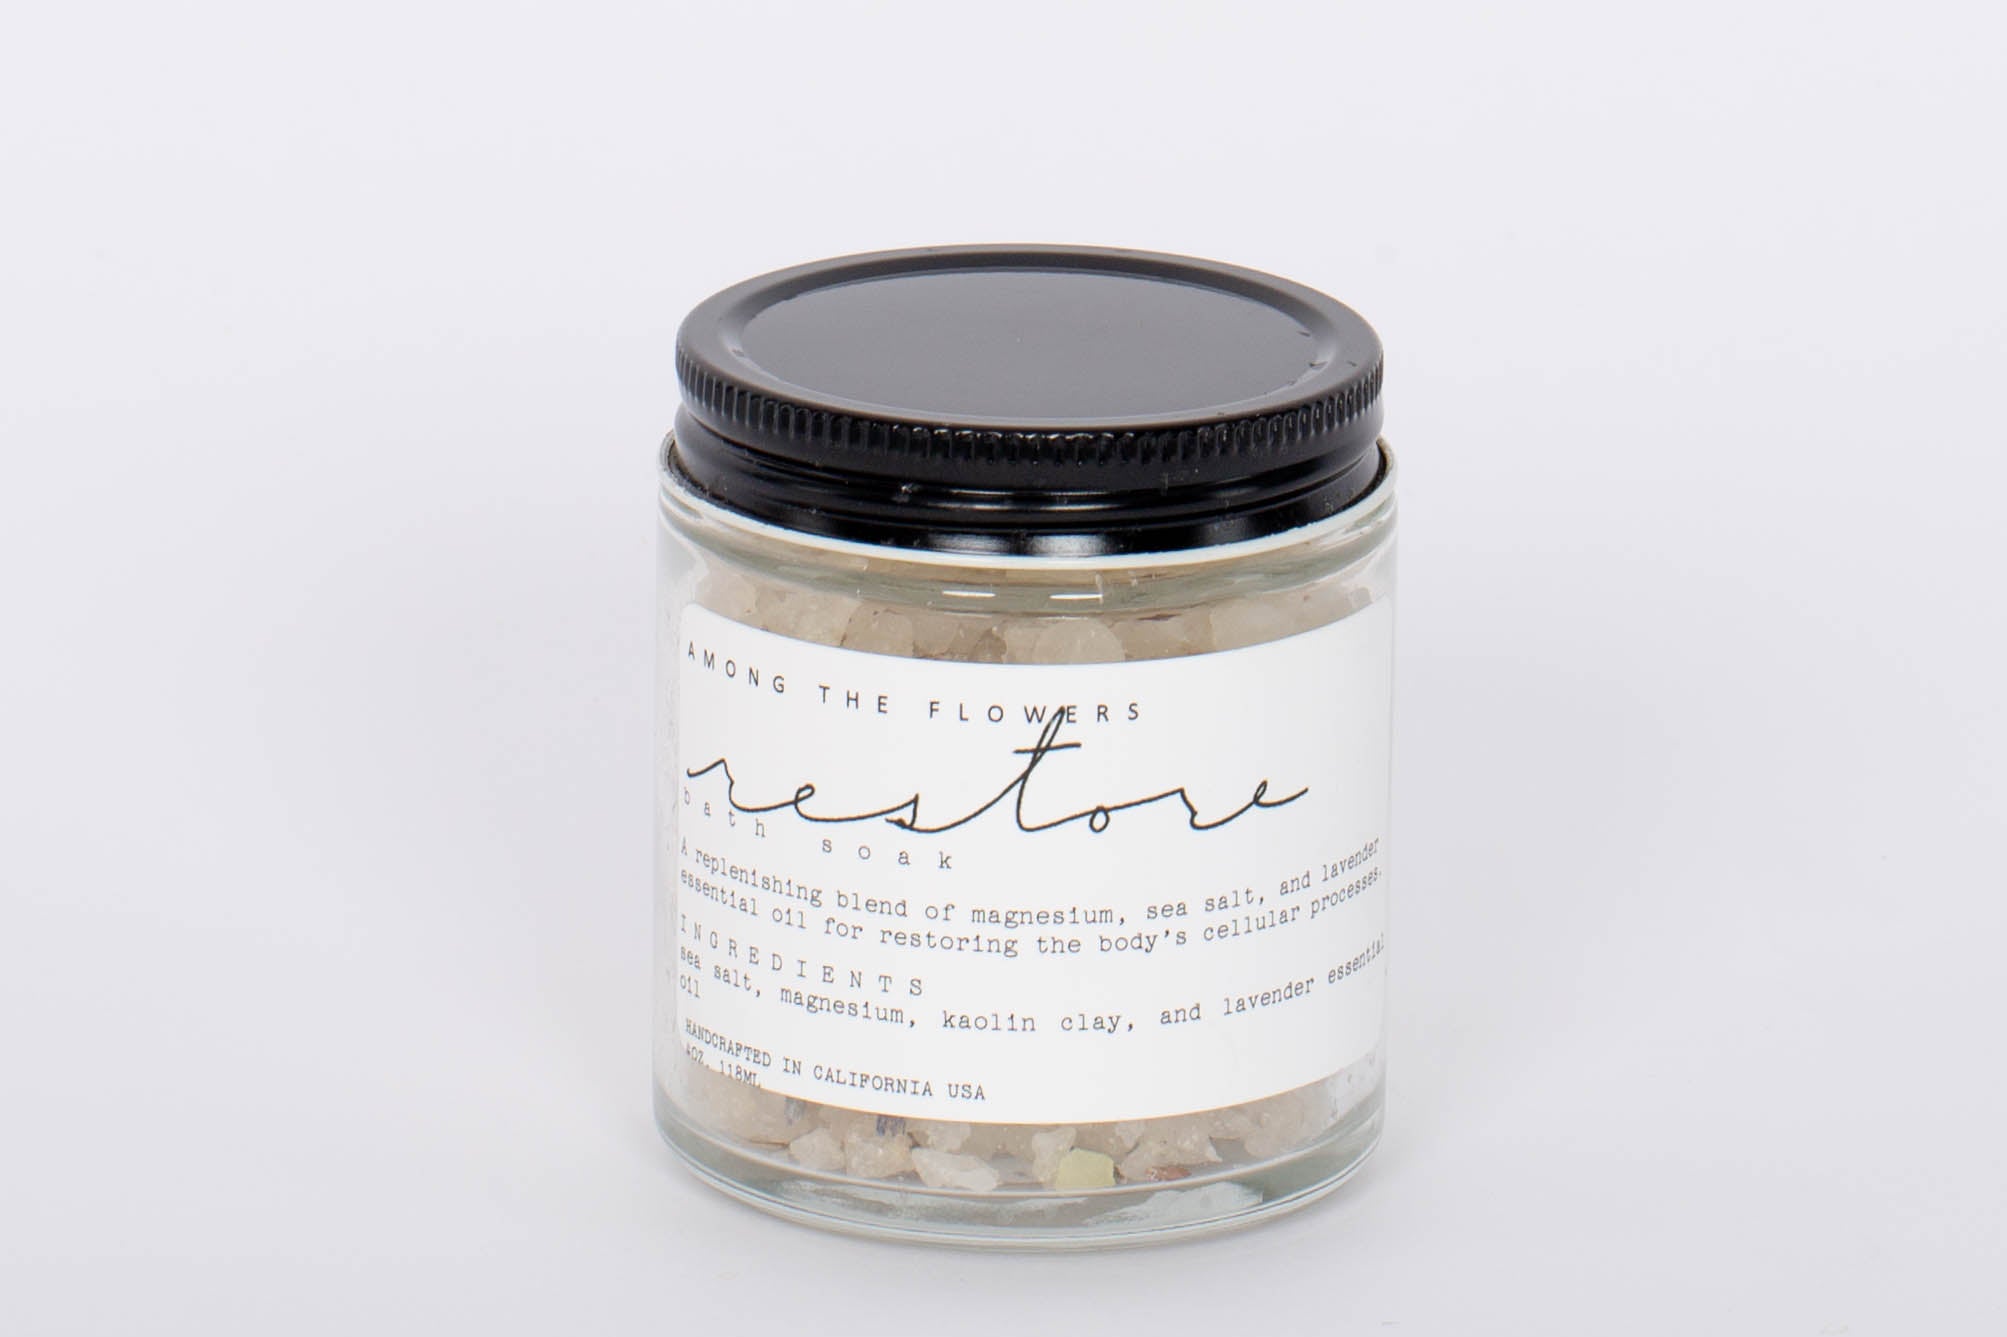 Among the Flowers Restore Bath Soak. R E S T O R E  This blend of lavender, magnesium flakes, and sea salt was designed to serve sensitive skin, while also restoring the body’s ever-lacking magnesium levels. This is a premium blend for children who experience cramps or strained muscles. Soothe the nervous system, and mental function, and replenish the body in one relaxing bathing experience.